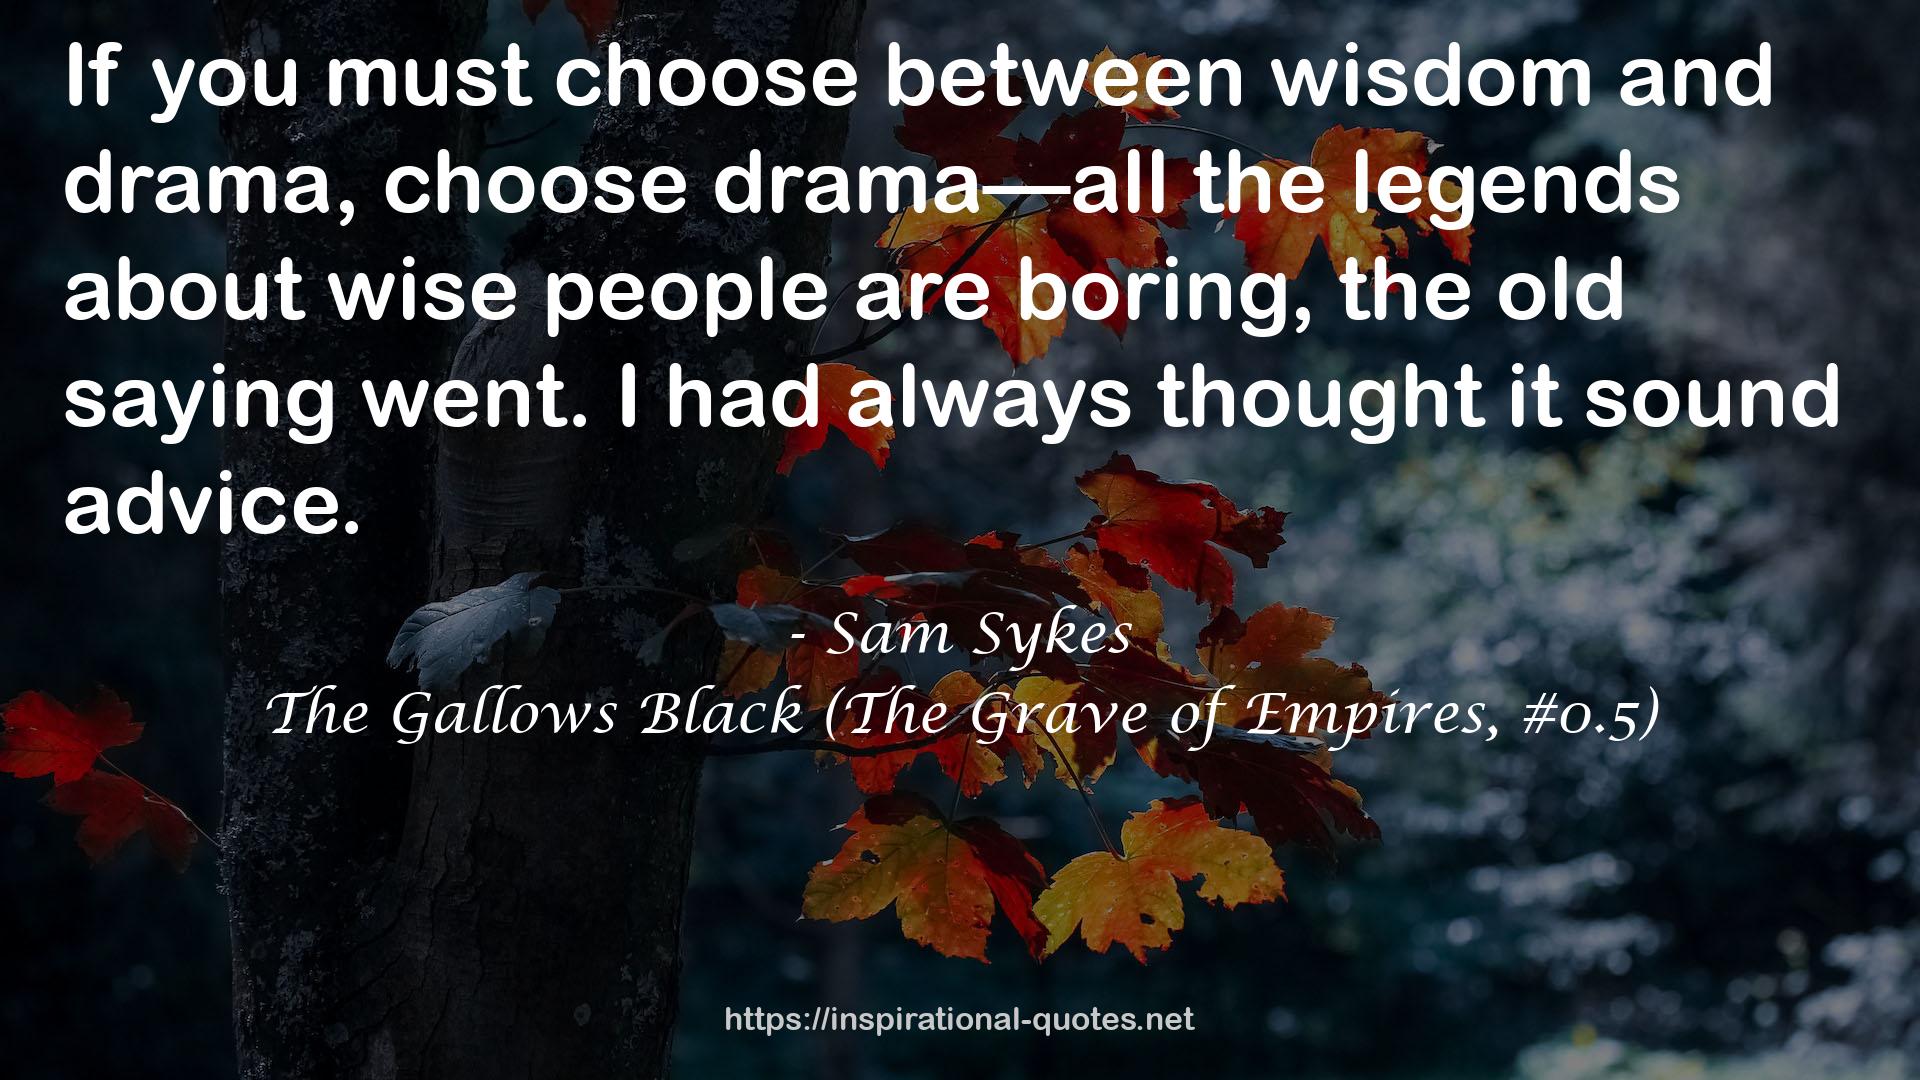 The Gallows Black (The Grave of Empires, #0.5) QUOTES